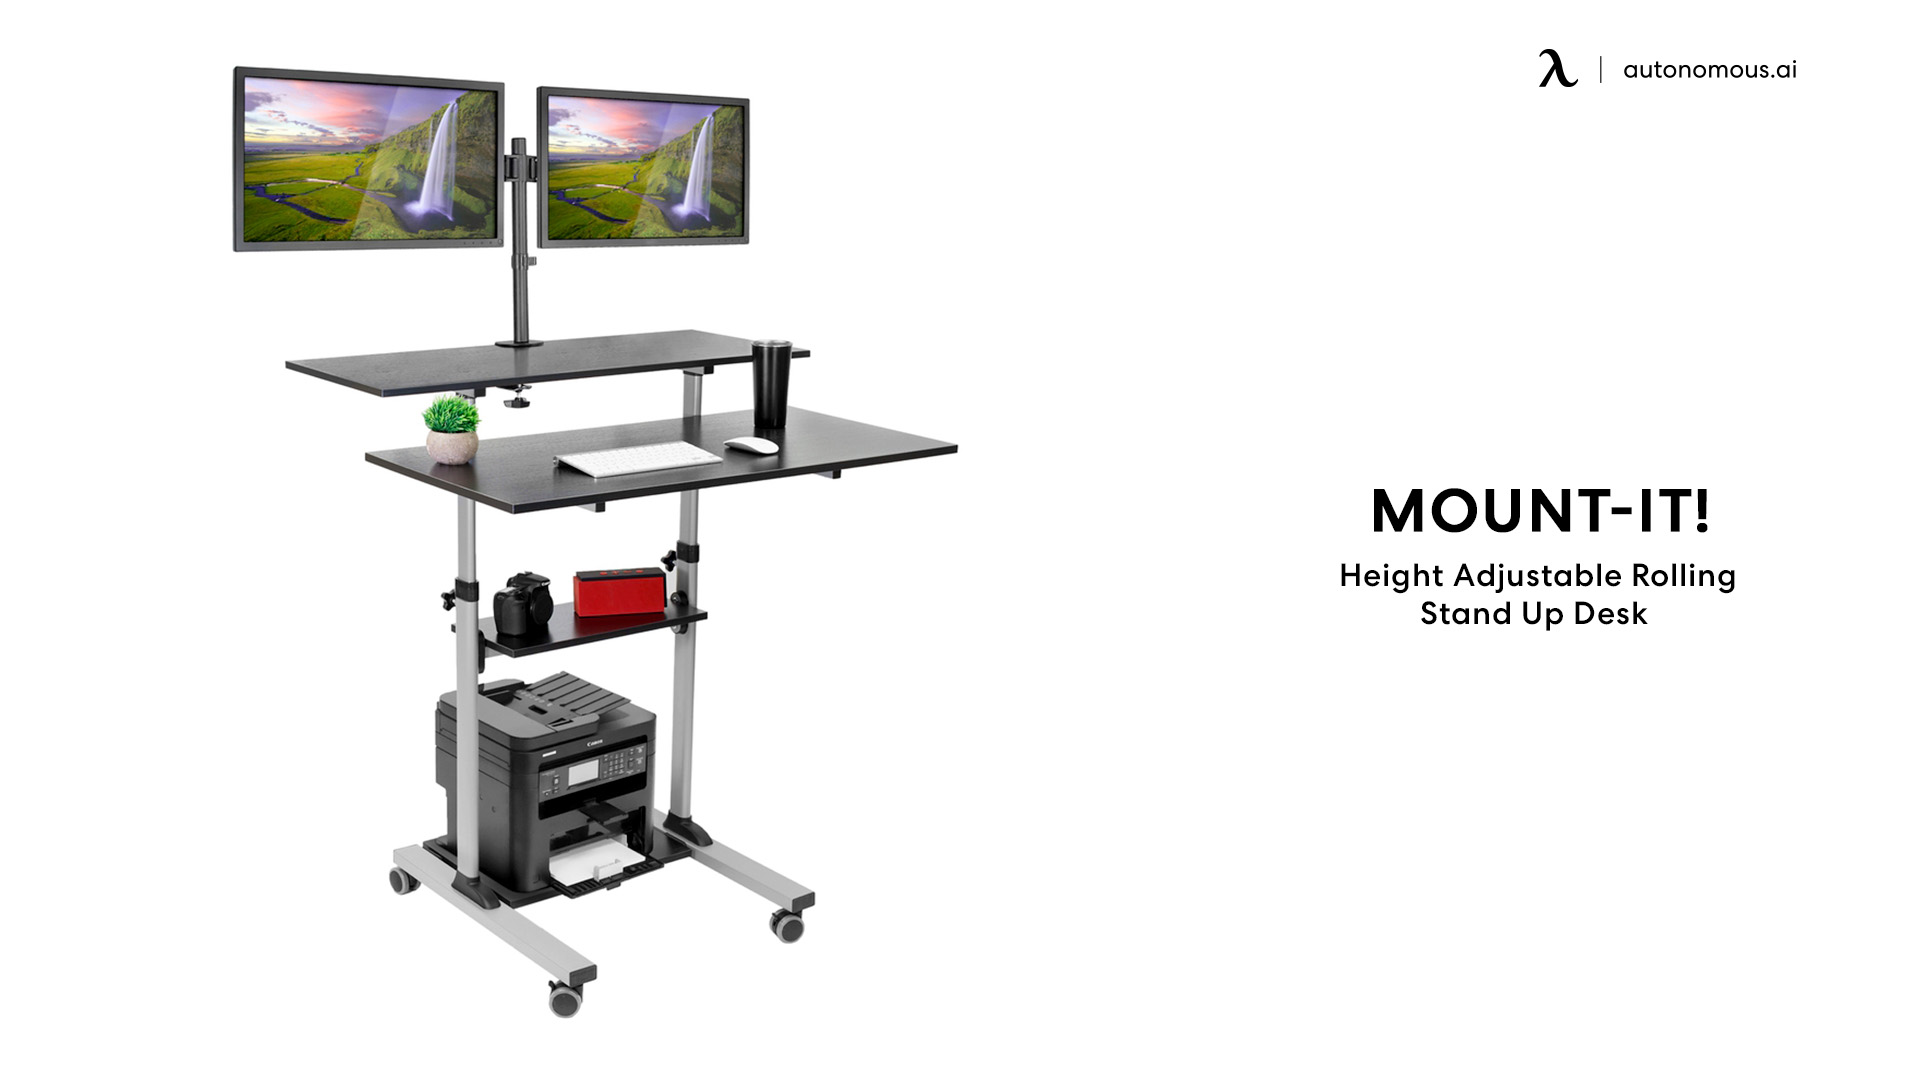 Mount-It! Height Adjustable Rolling Stand Up Desk